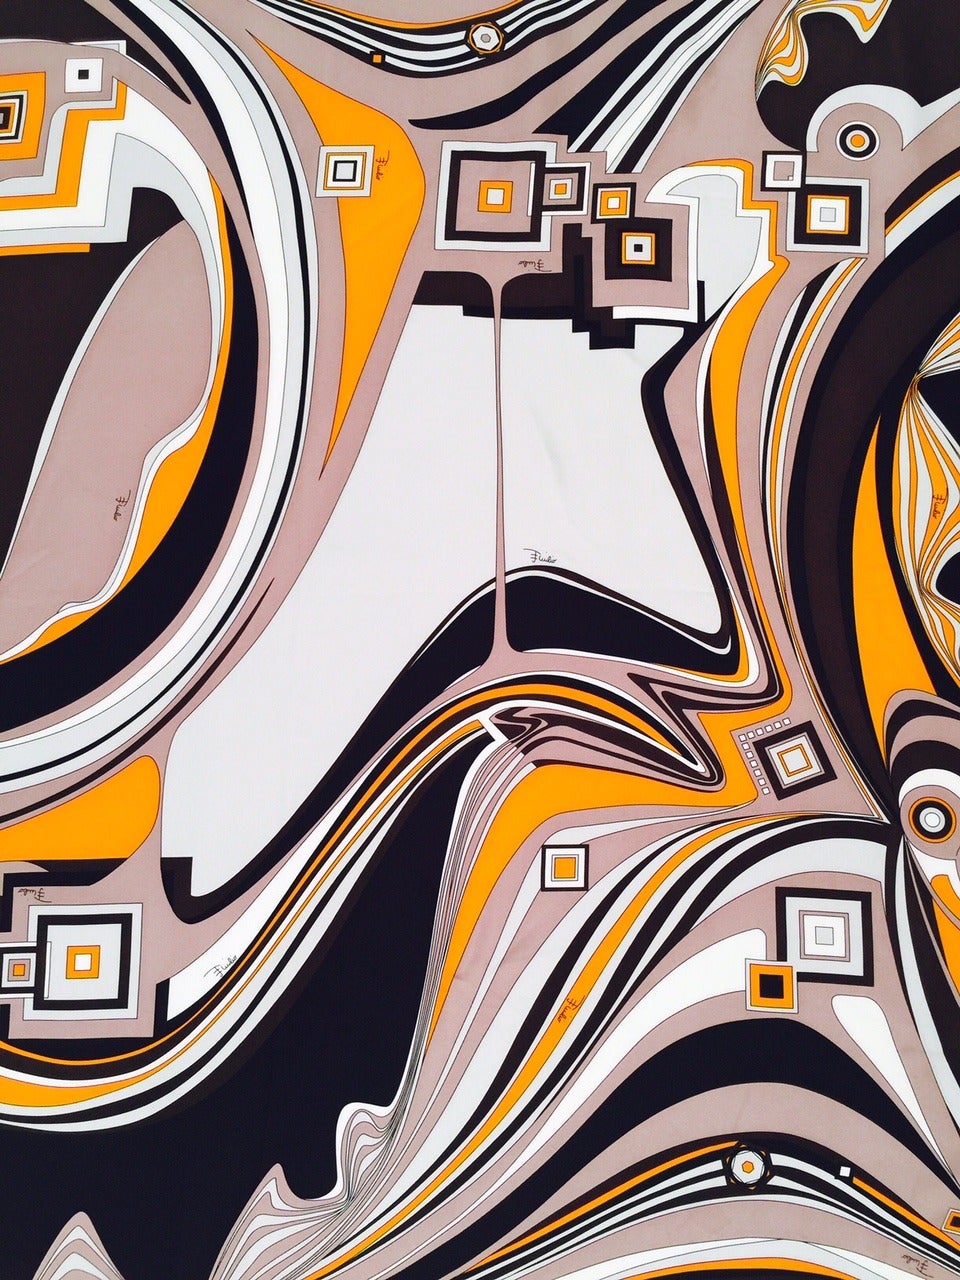 100% silk twill scarf is unmistakably Pucci!  Bold, geometric pattern in subdued shades of orange, black, chocolate and taupe creates a swirl of Italian high drama.  Classic and collectible.  Tie at the neck on a hand bag or, a la Jackie O, on your